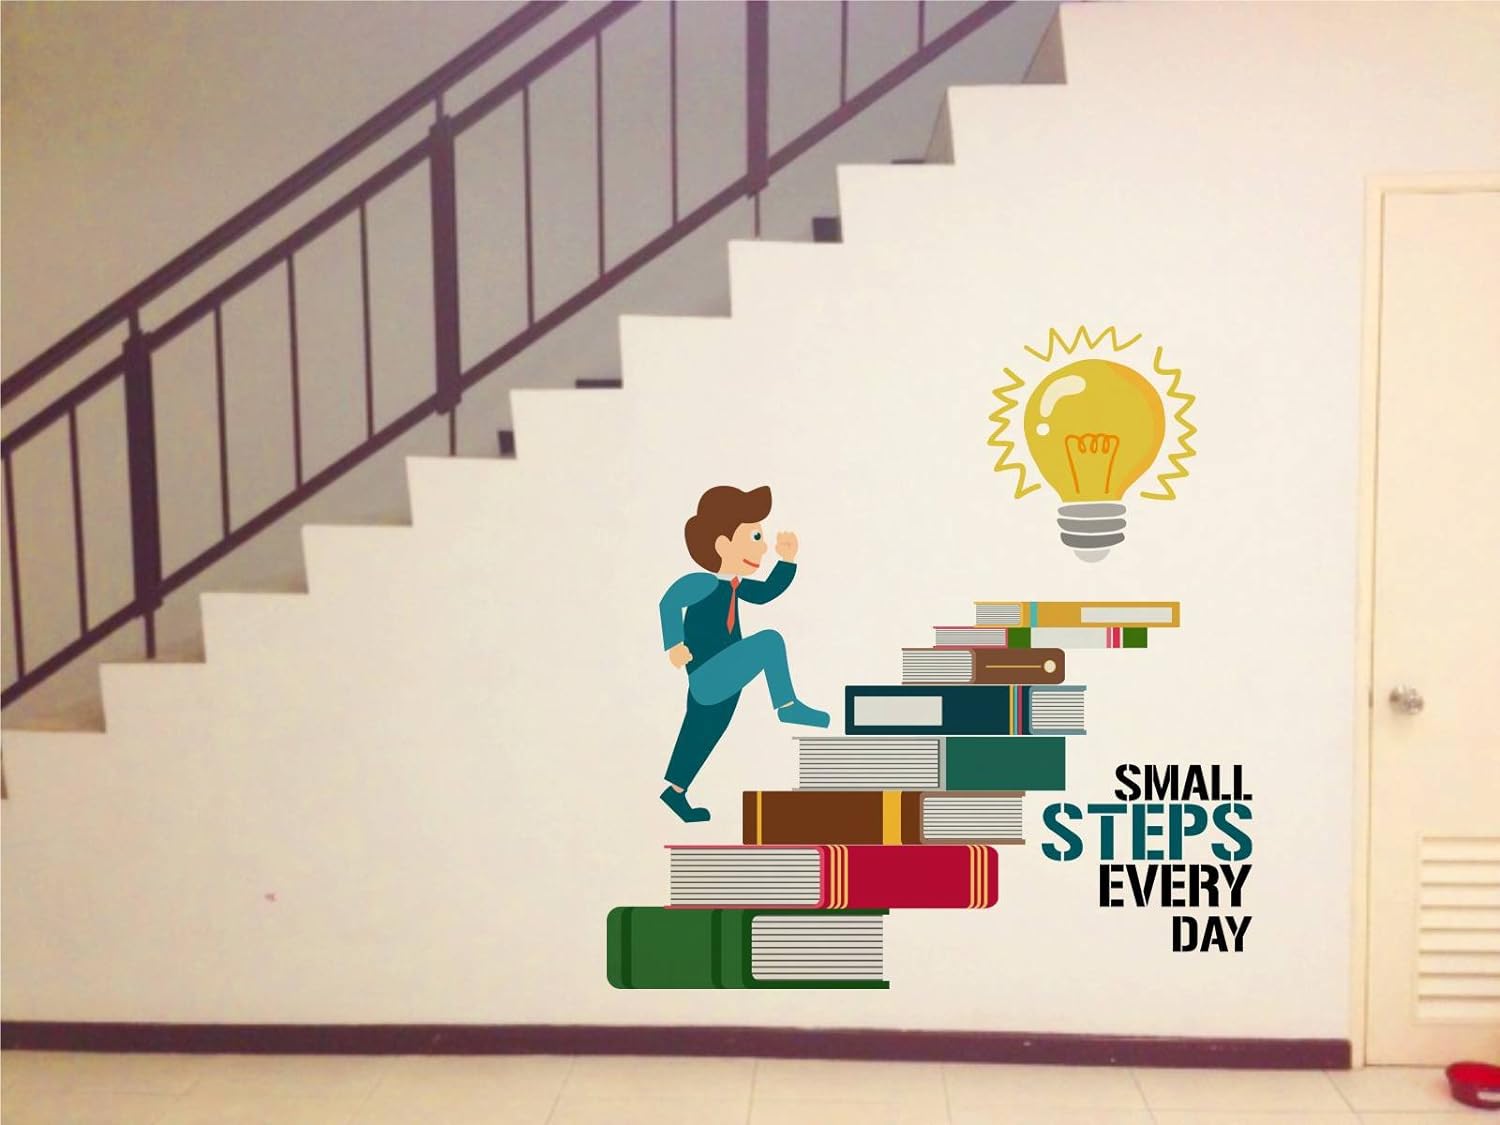 Rawpockets-Small Steps Every Day Motivation Quote-Wall Sticker-Stumbit Wall Sticker